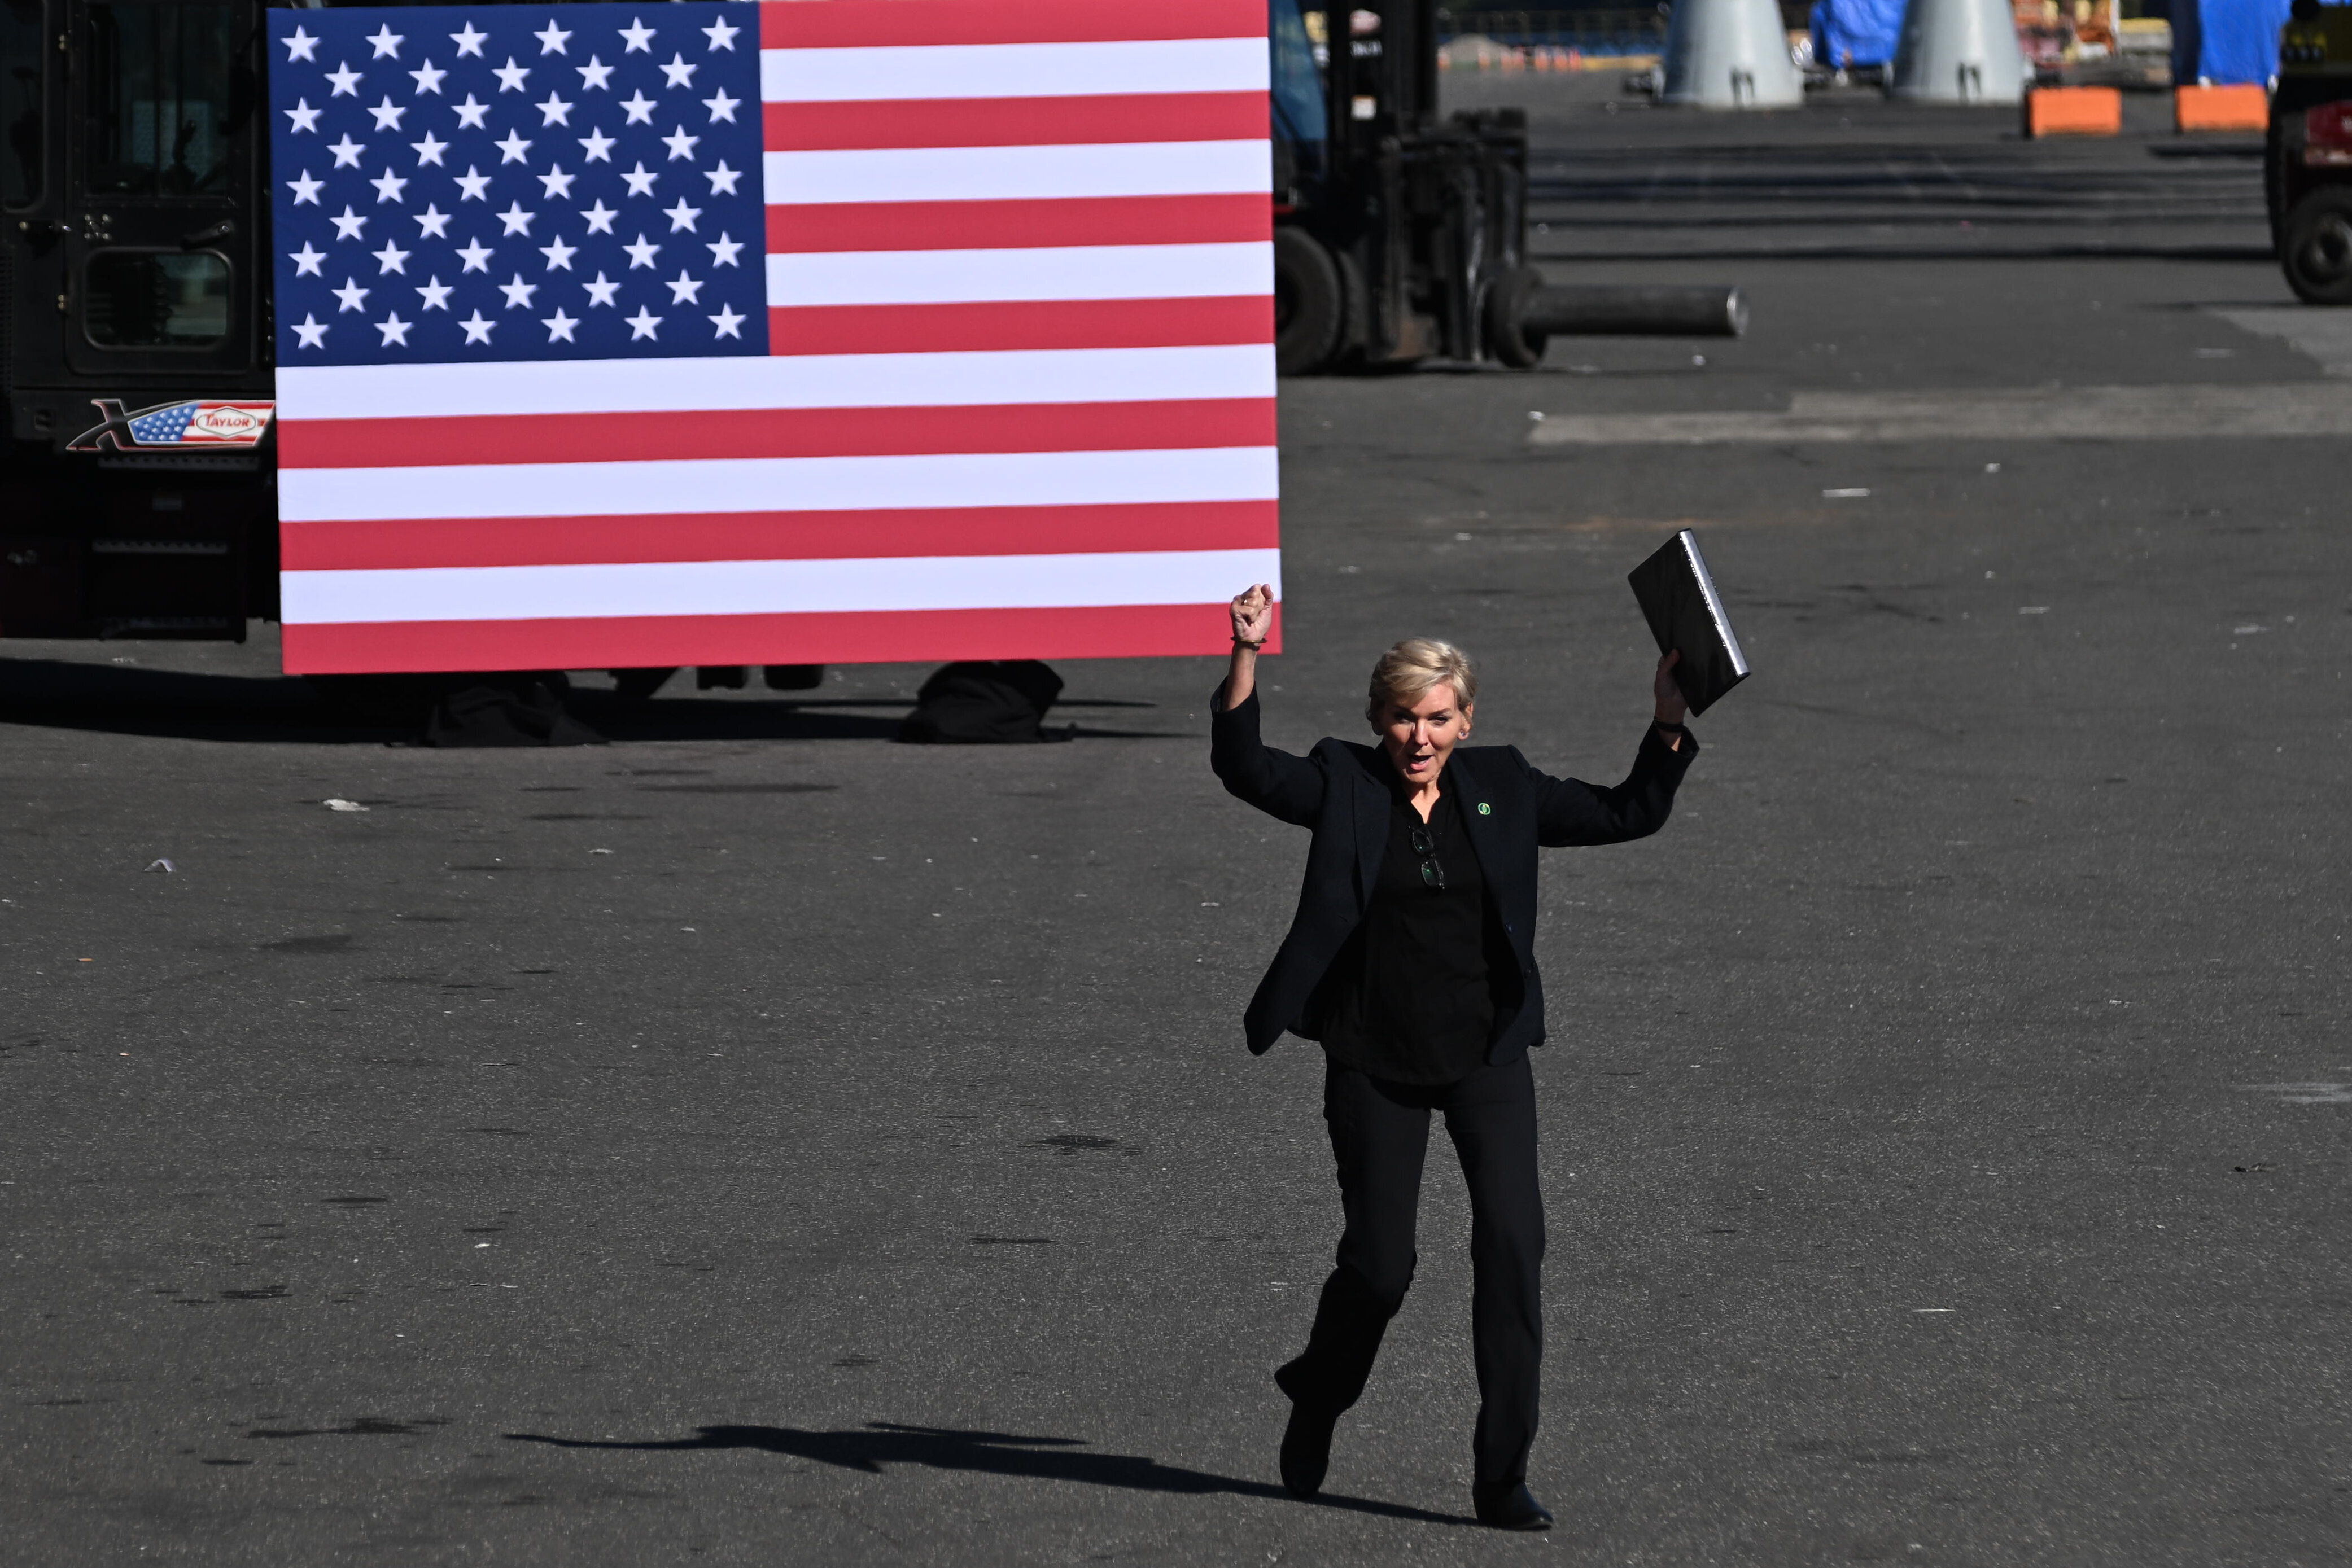 Secretary of Energy Jennifer Granholm arrives on Oct. 13, 2023, at Tioga Marine Terminal in Philadelphia. Granholm was there to speak before President Joe Biden as they addressed Biden's agenda on union jobs, infrastructure investment, accelerating the transition to clean energy and combating the climate crisis.